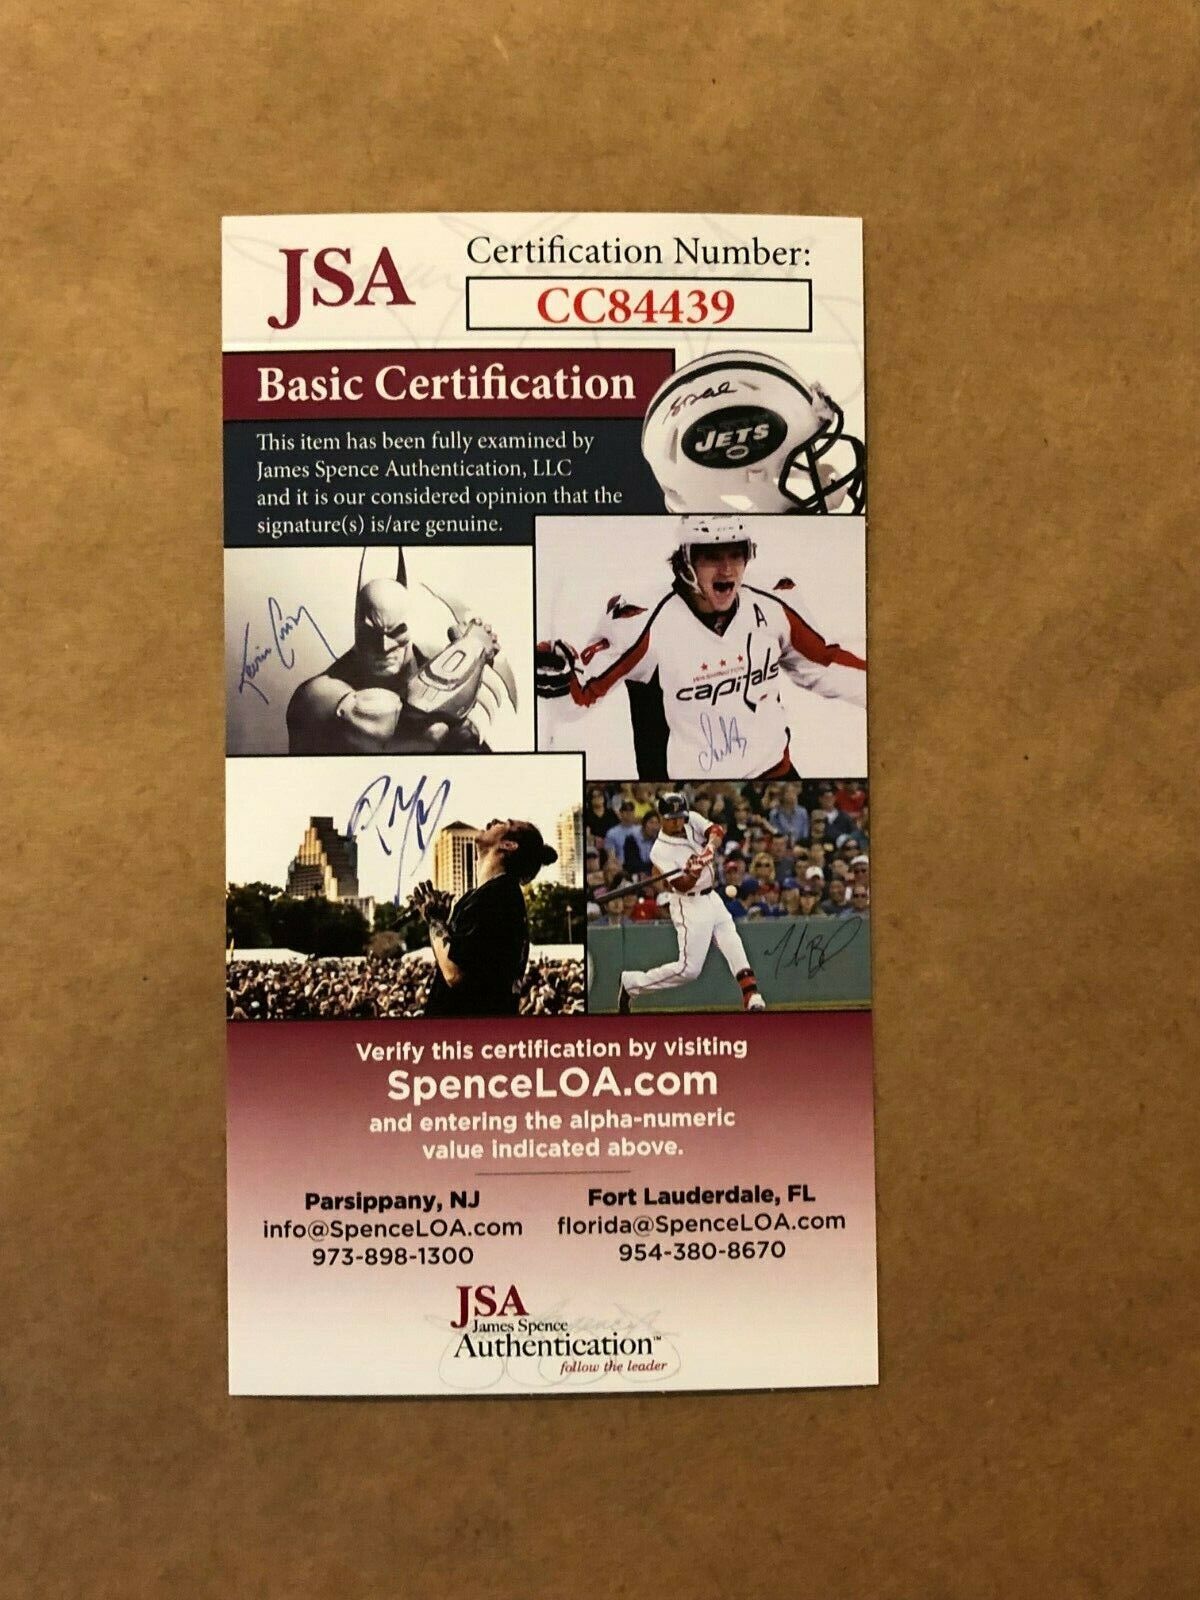 MVP Authentics Framed Jose Canseco Autographed Signed Inscribed Oakland A's 11X14 Photo Jsa Coa 107.10 sports jersey framing , jersey framing